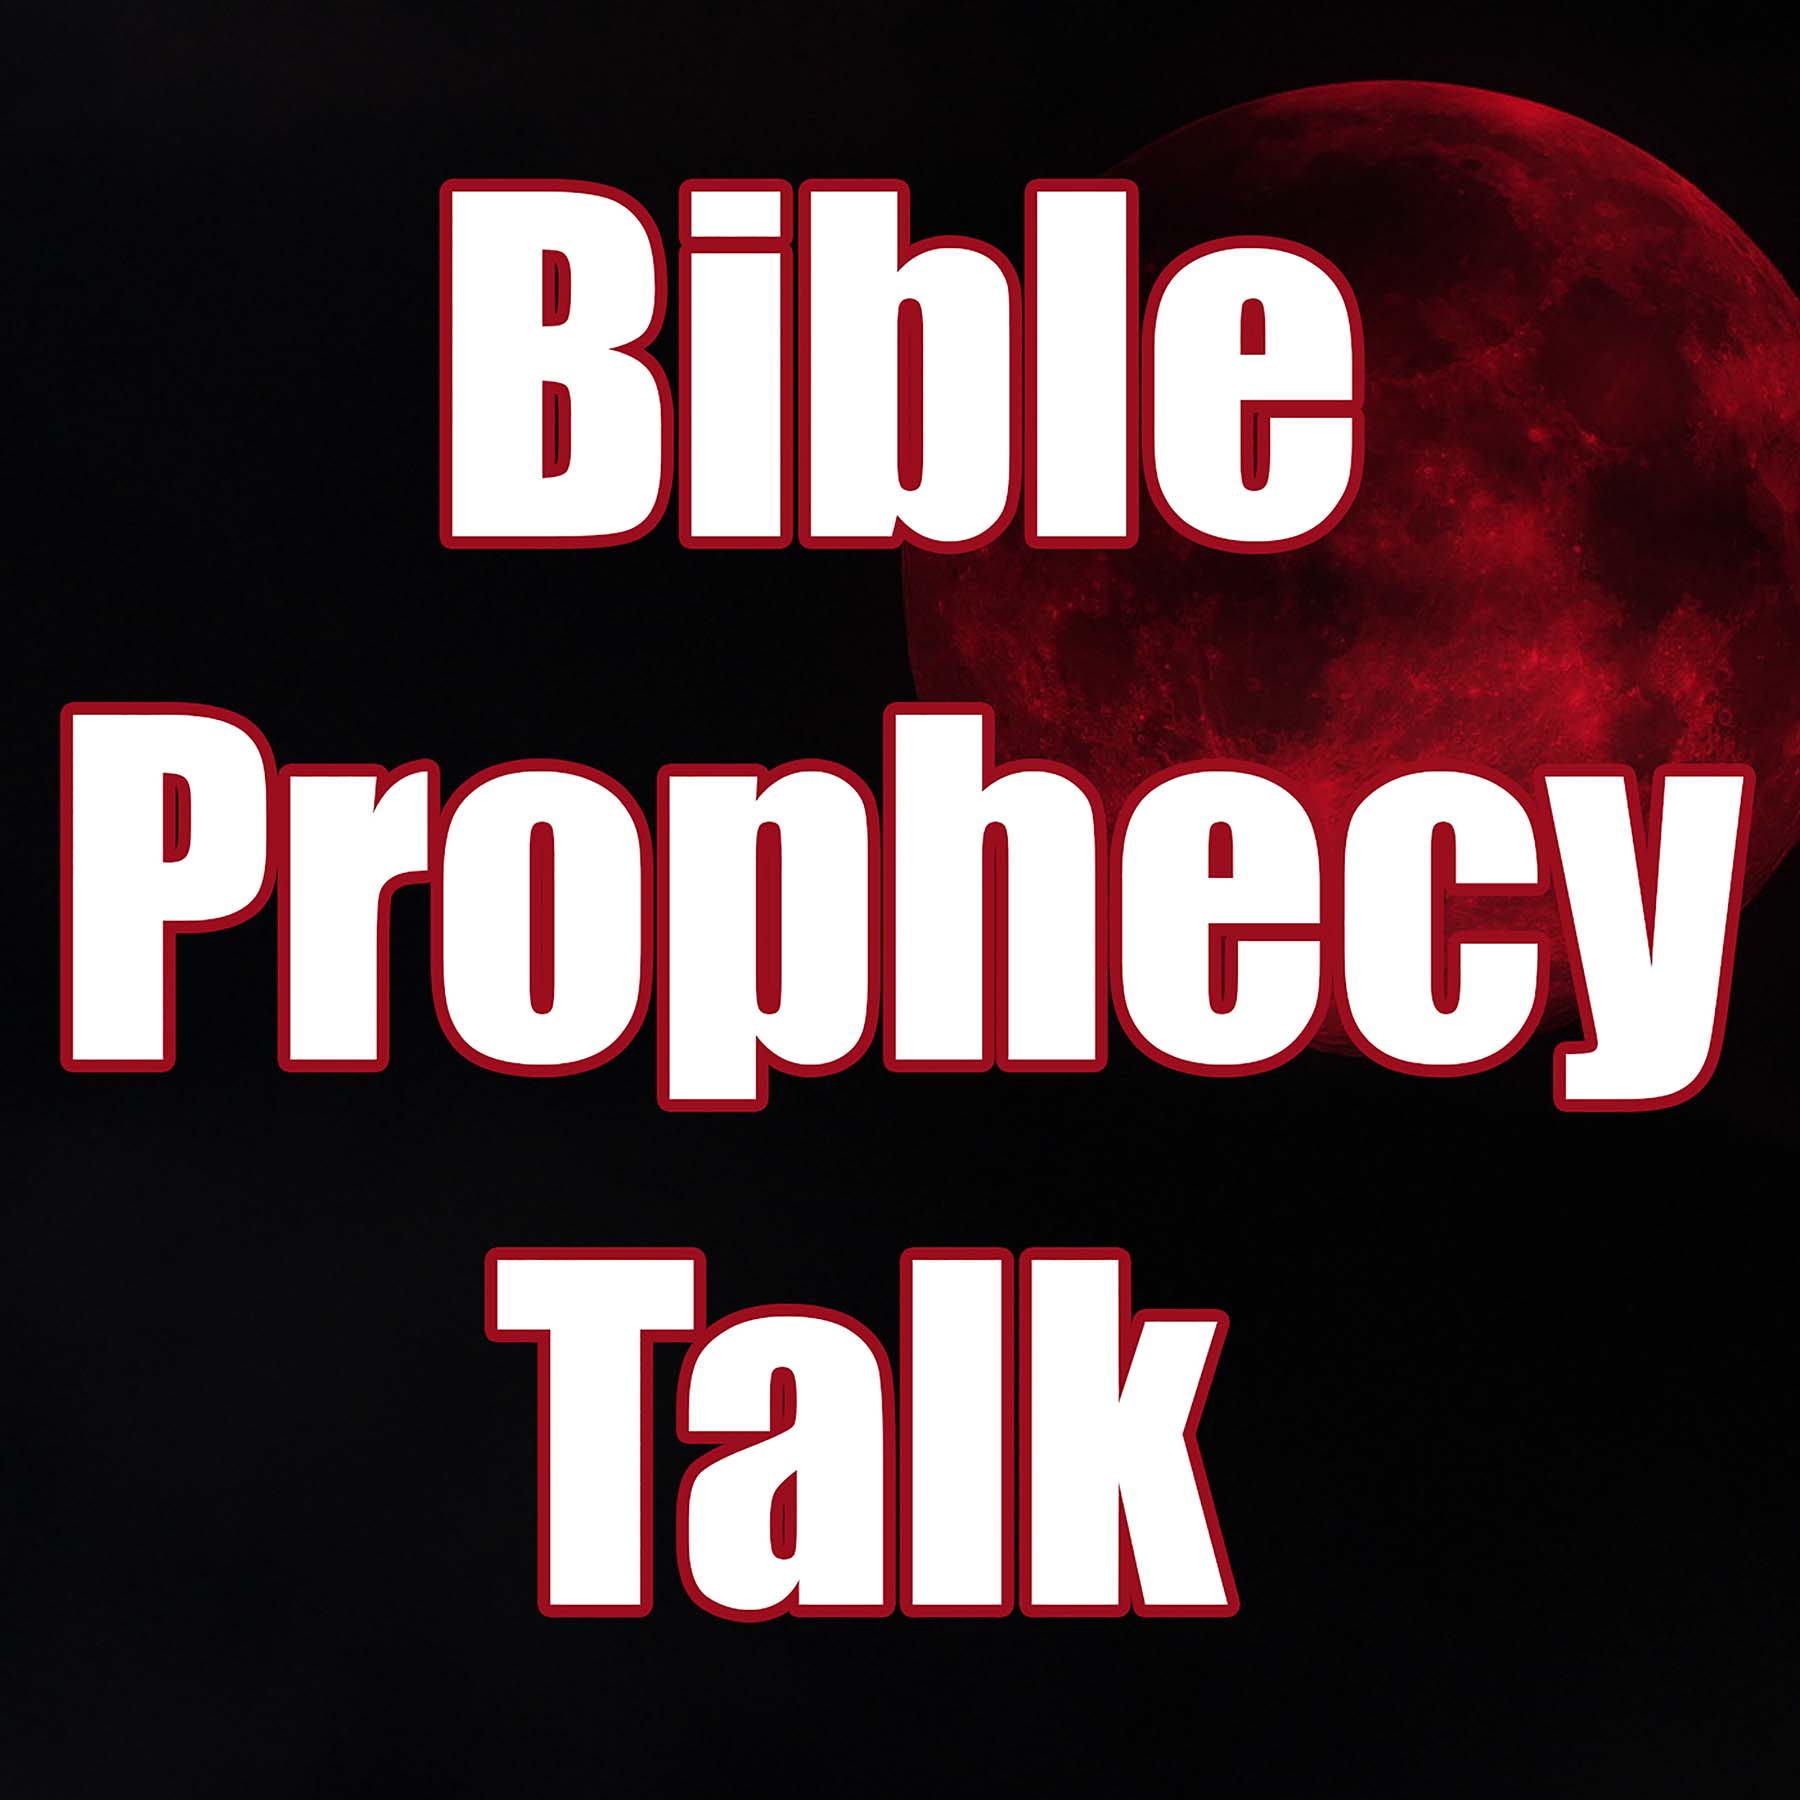 Bible Prophecy Talk - End Times News and Theology Podcast